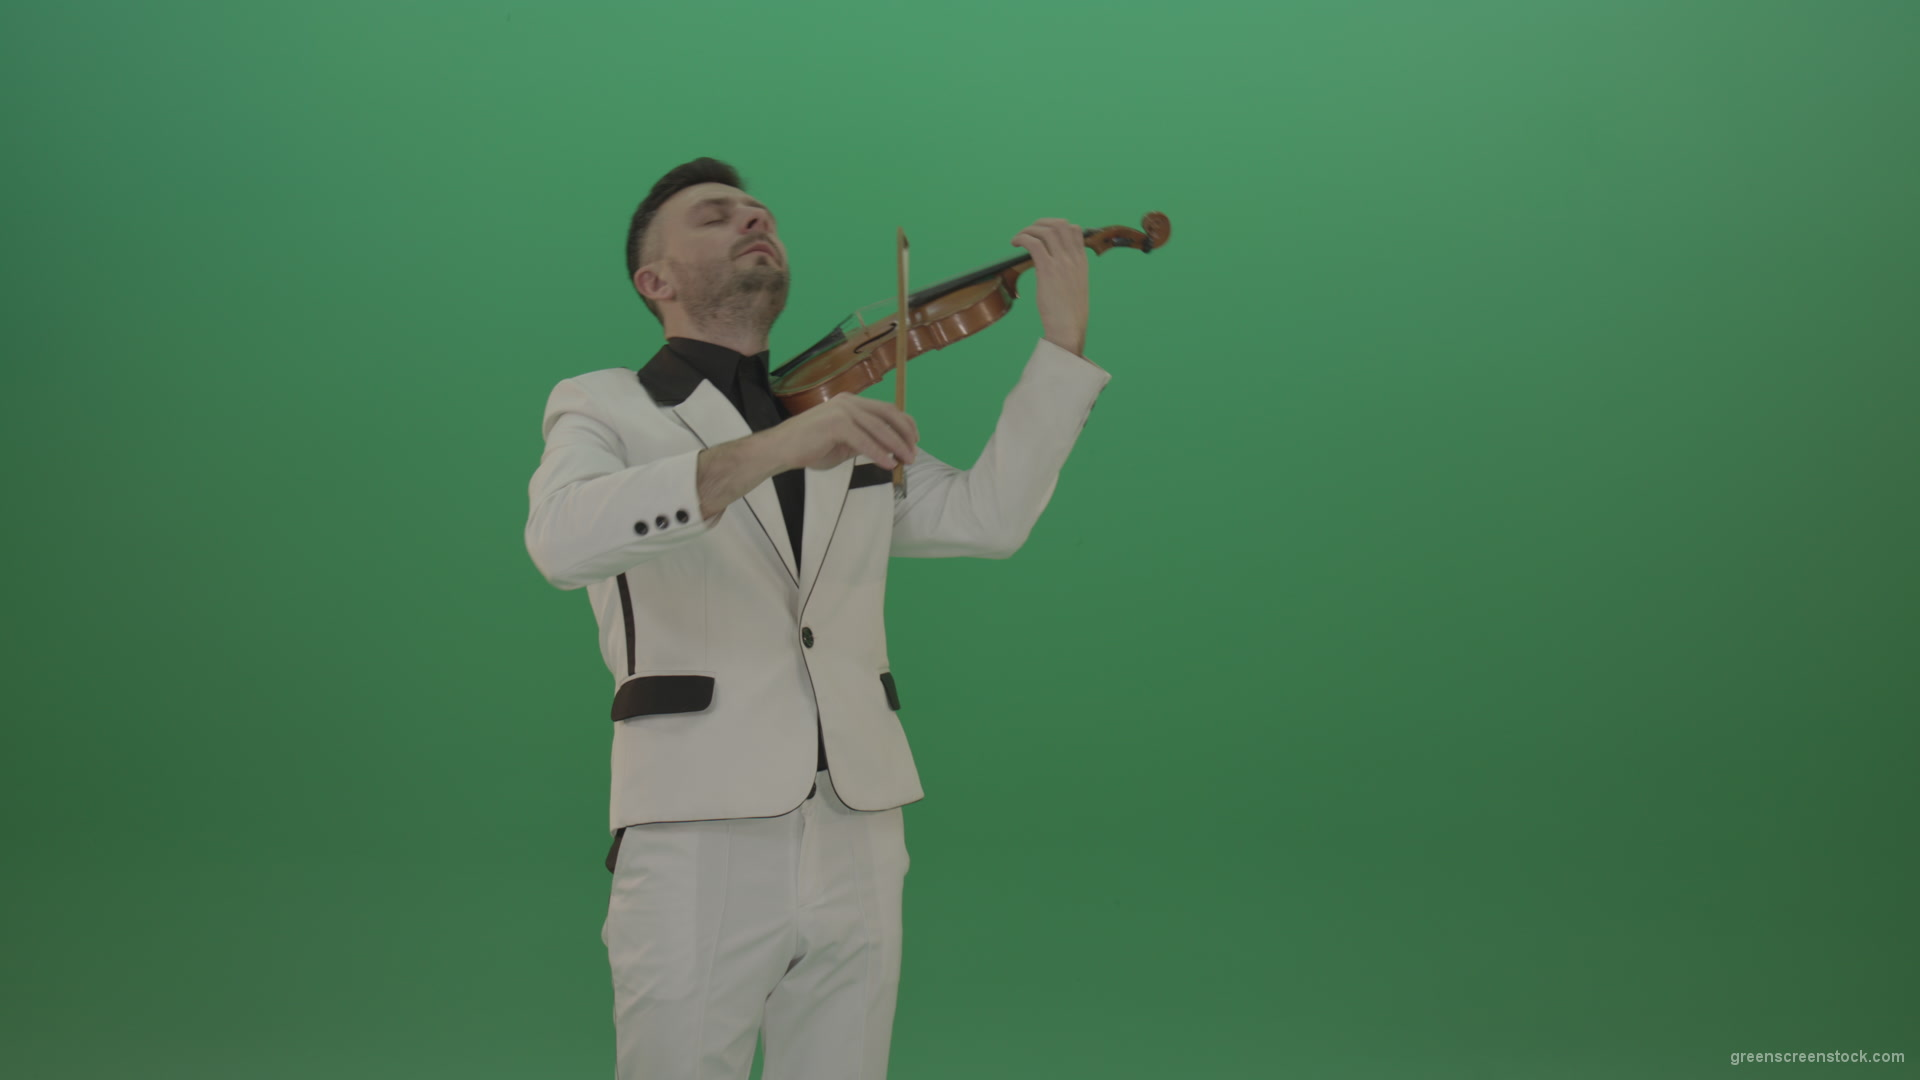 Man-is-playing-slow-love-in-white-costume-on-violin-Fiddle-string-music-instrument-isolated-on-green-screen_002 Green Screen Stock